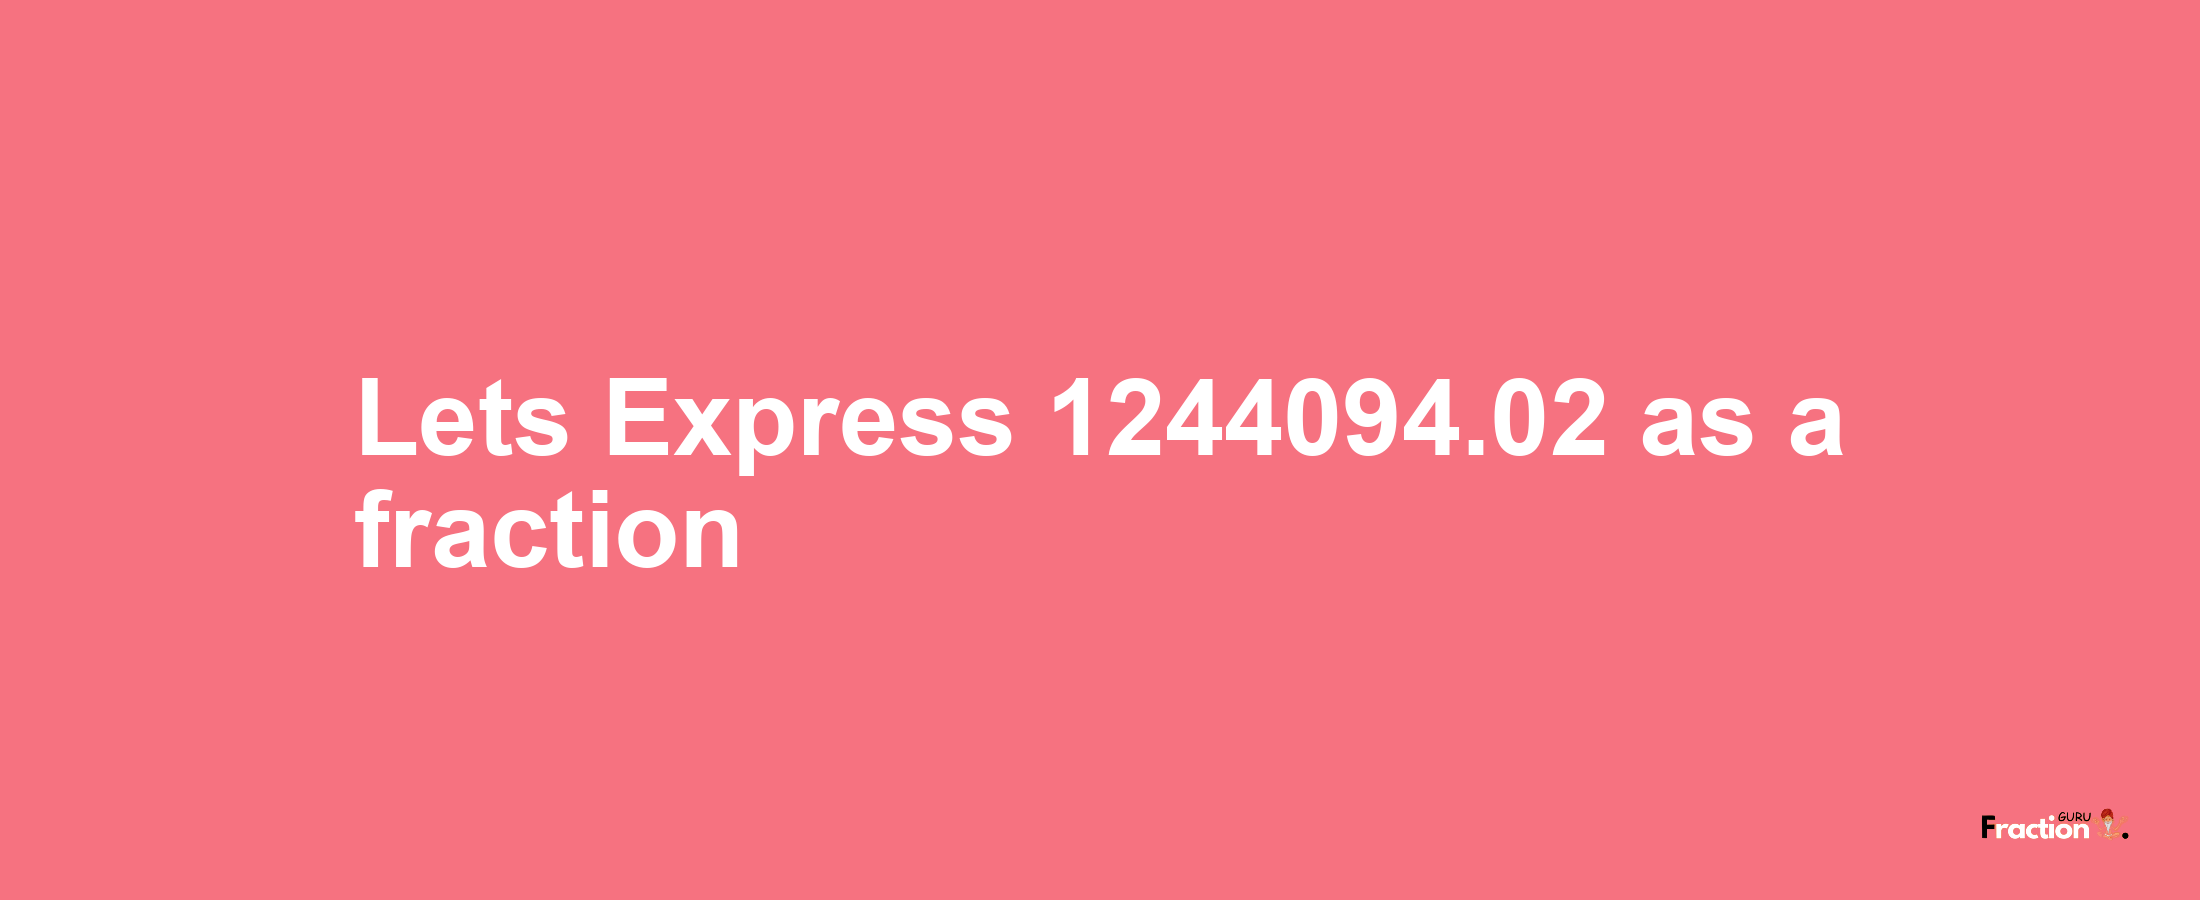 Lets Express 1244094.02 as afraction